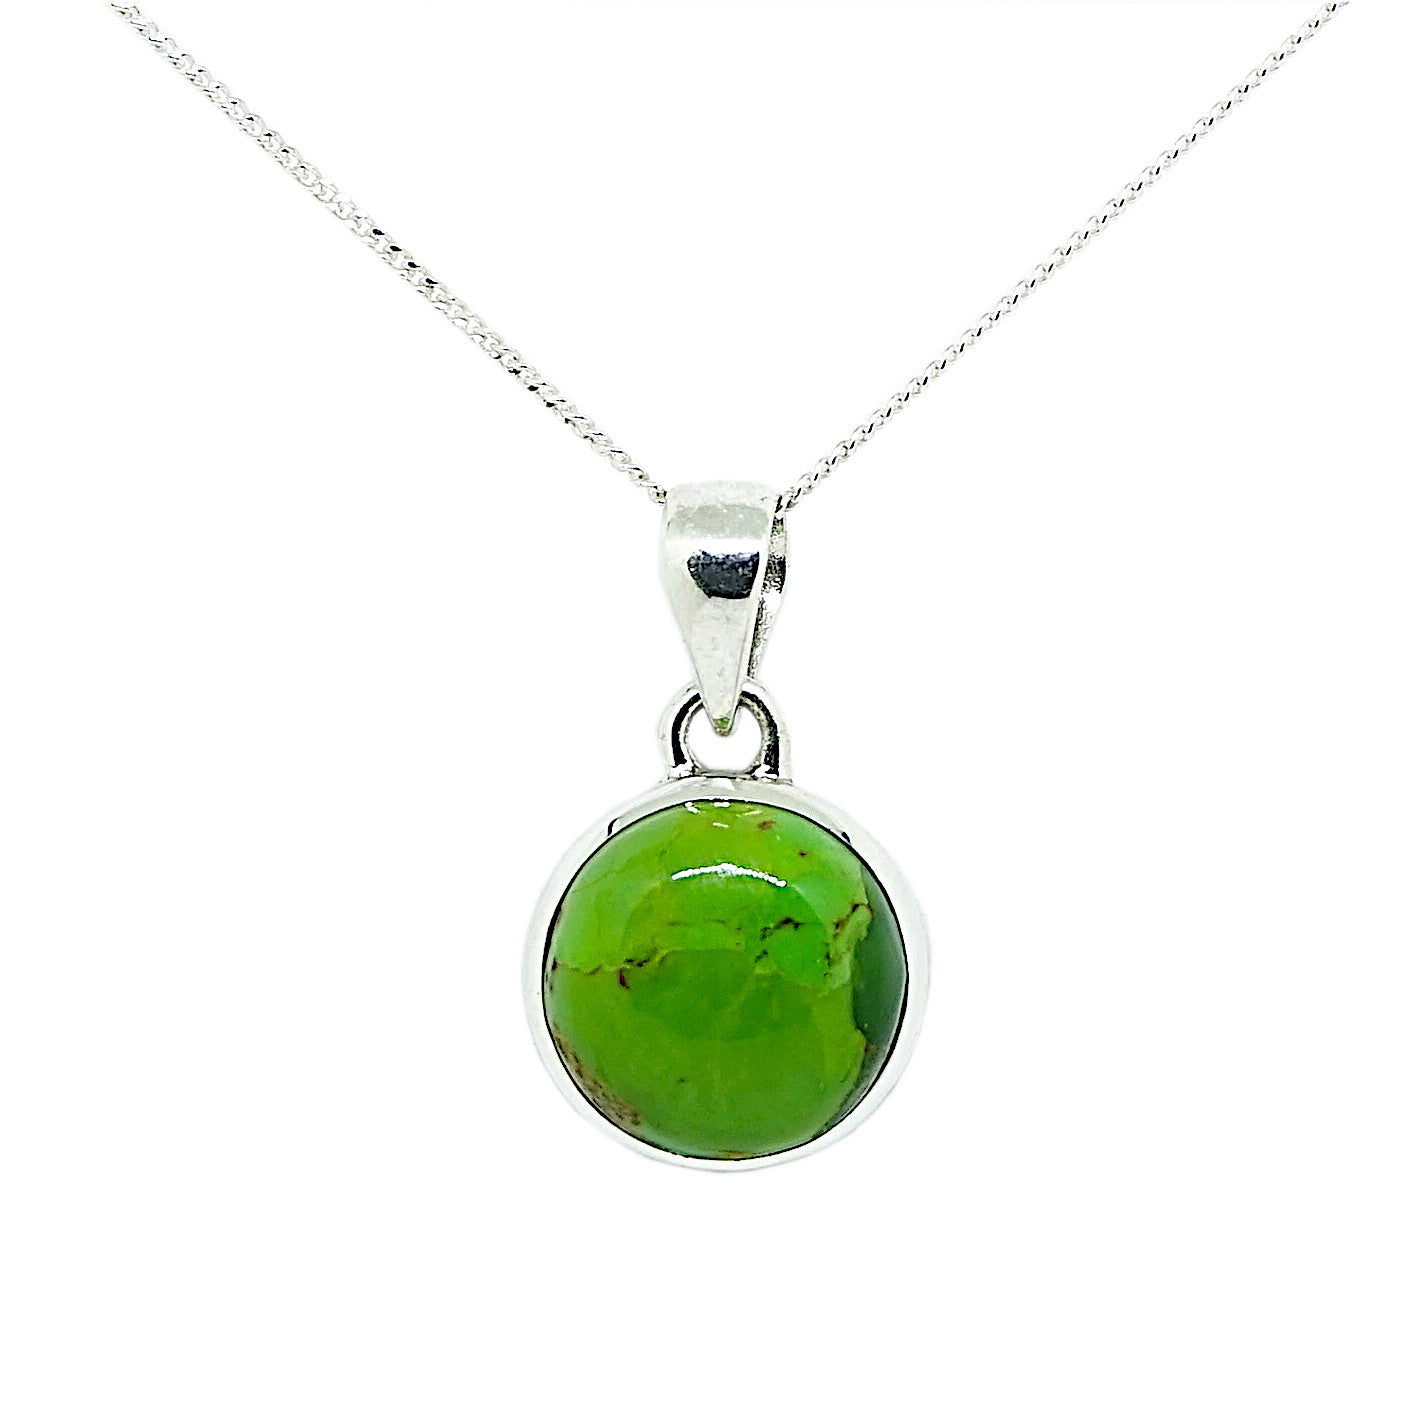 Green Turquoise Sterling Silver Pendant and Chain